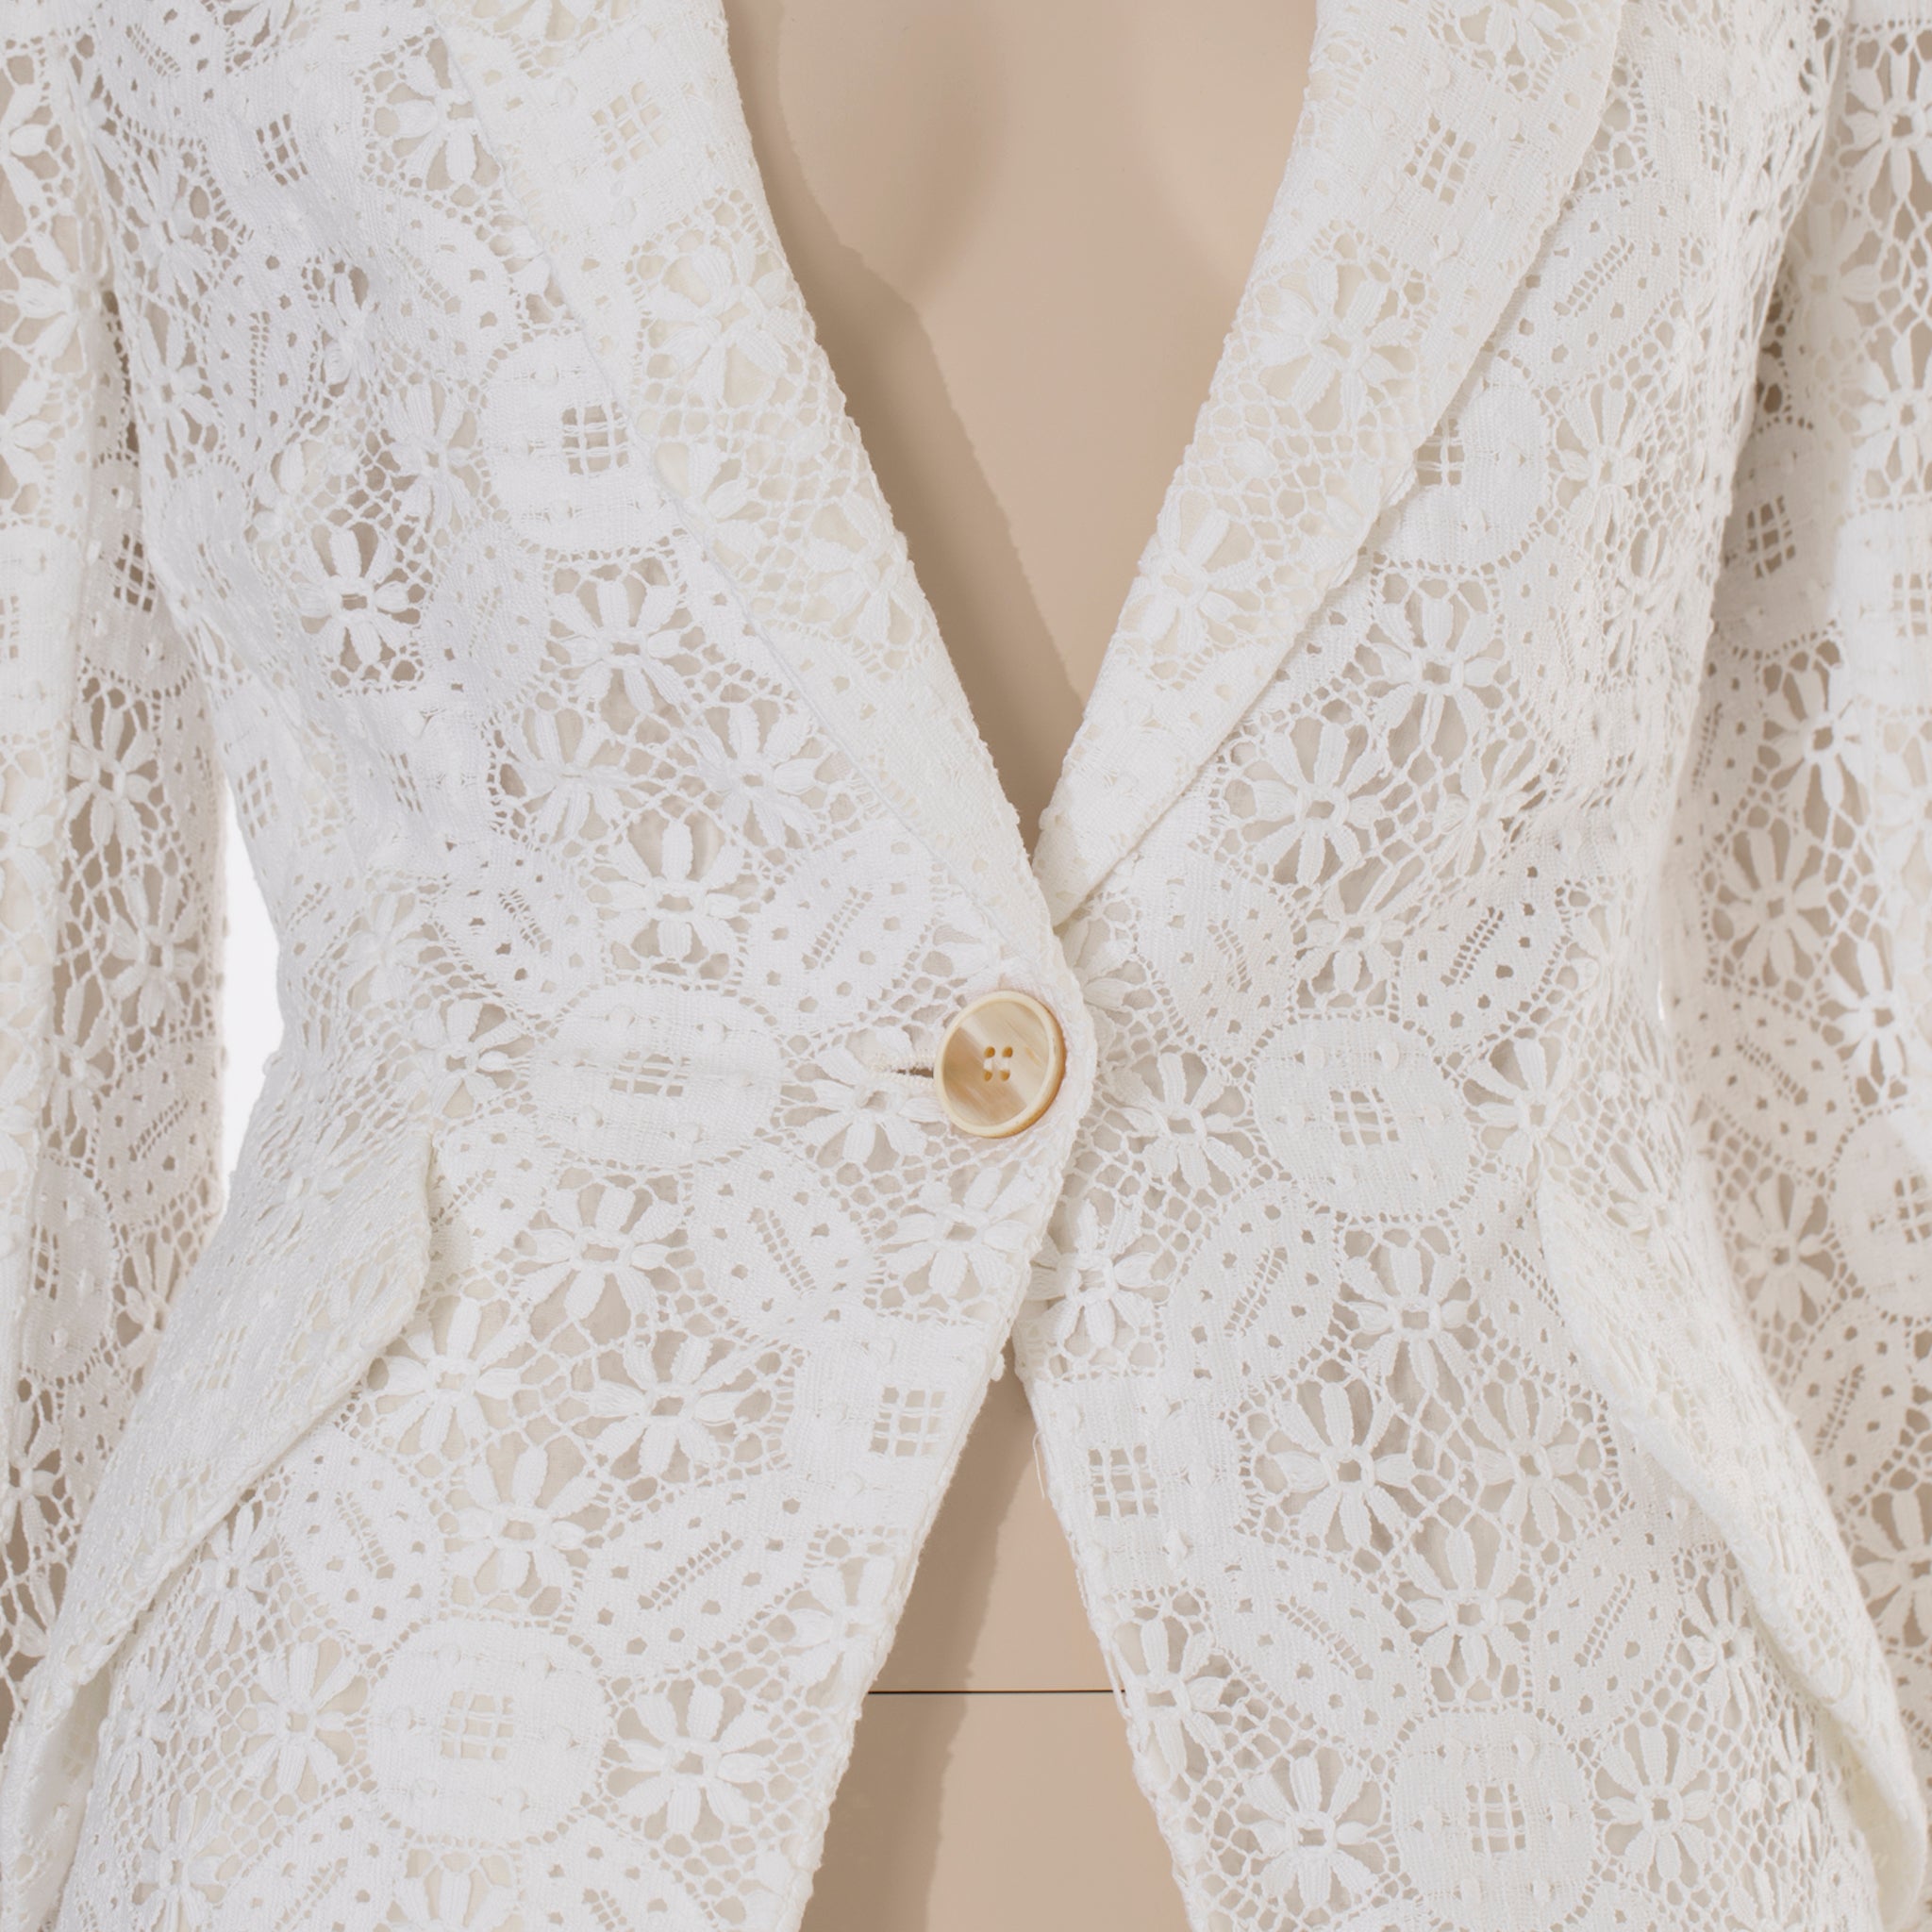 Alexander McQueen Broderie Anglaise Lace Blazer 38 IT